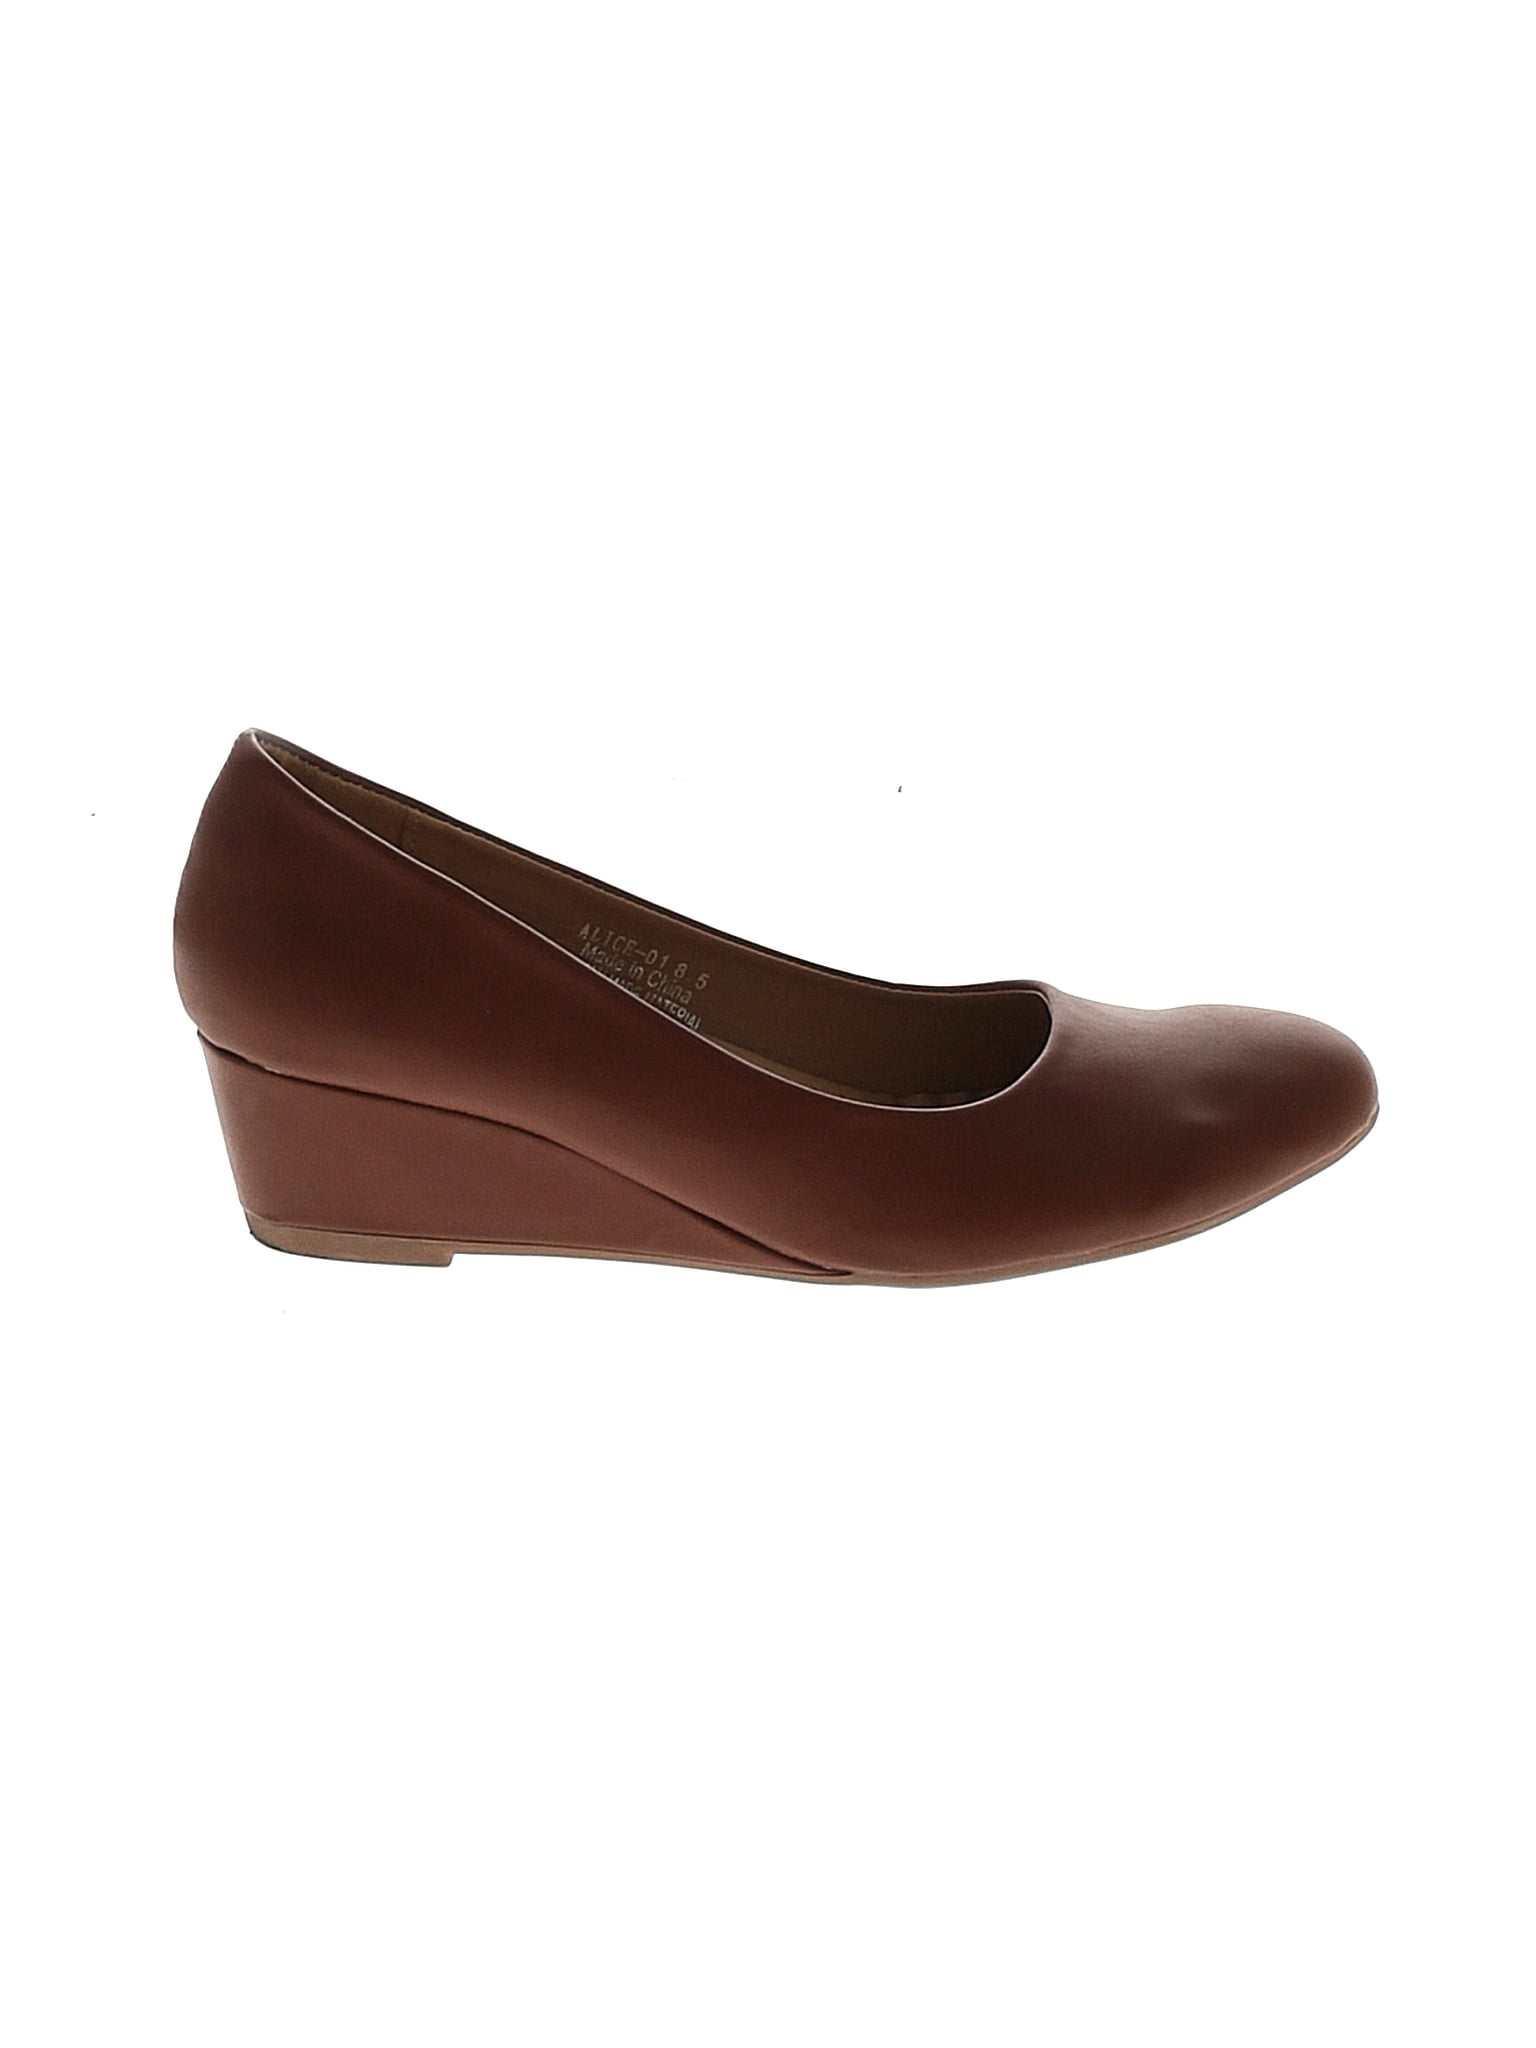 Riverberry Women's Shoes On Sale Up To 90% Off Retail